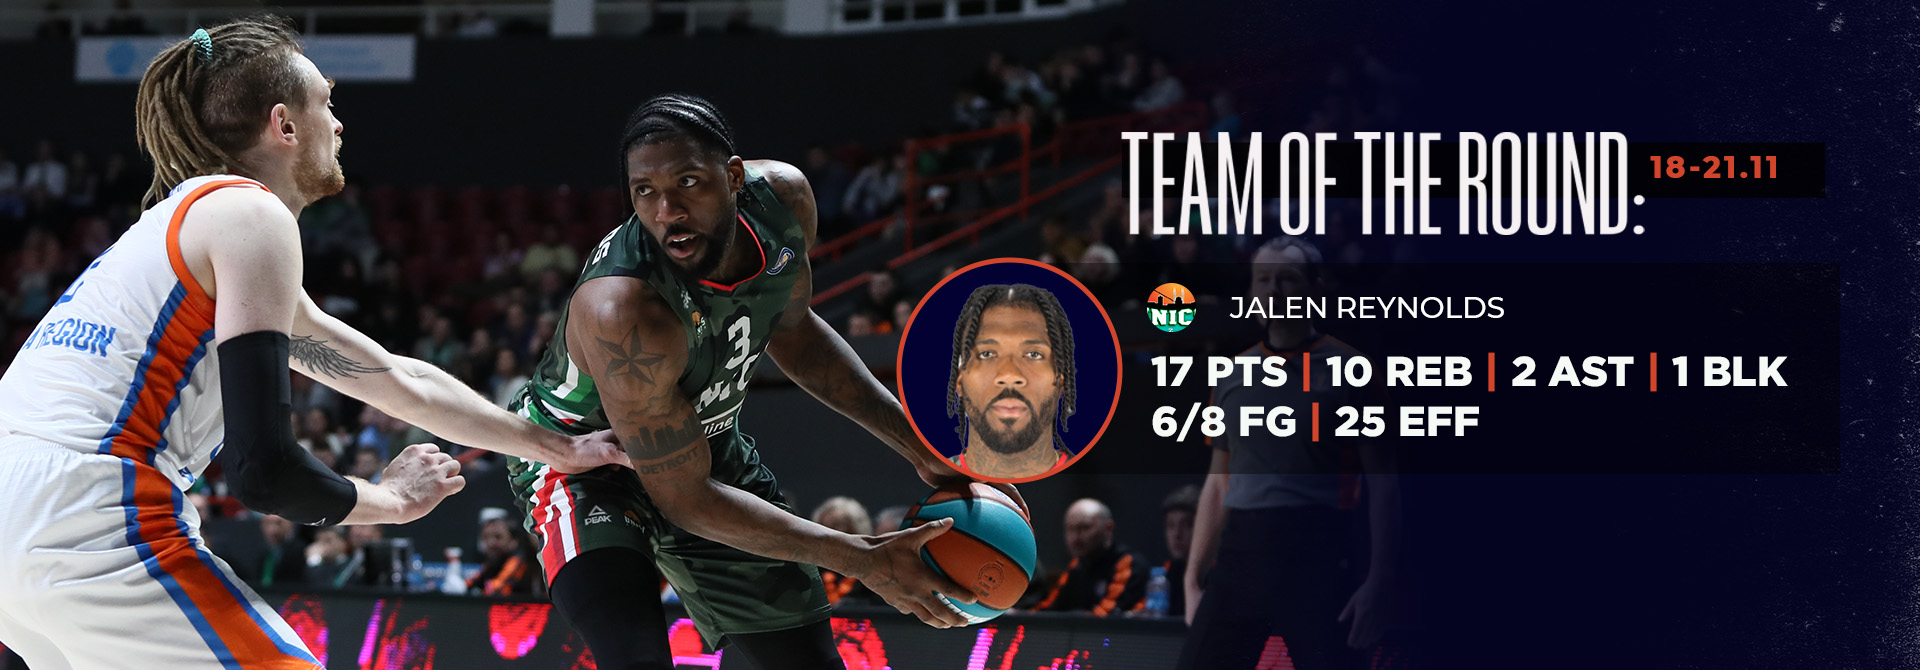 Jalen Reynolds was included in the All-VTB United League Team of the week!